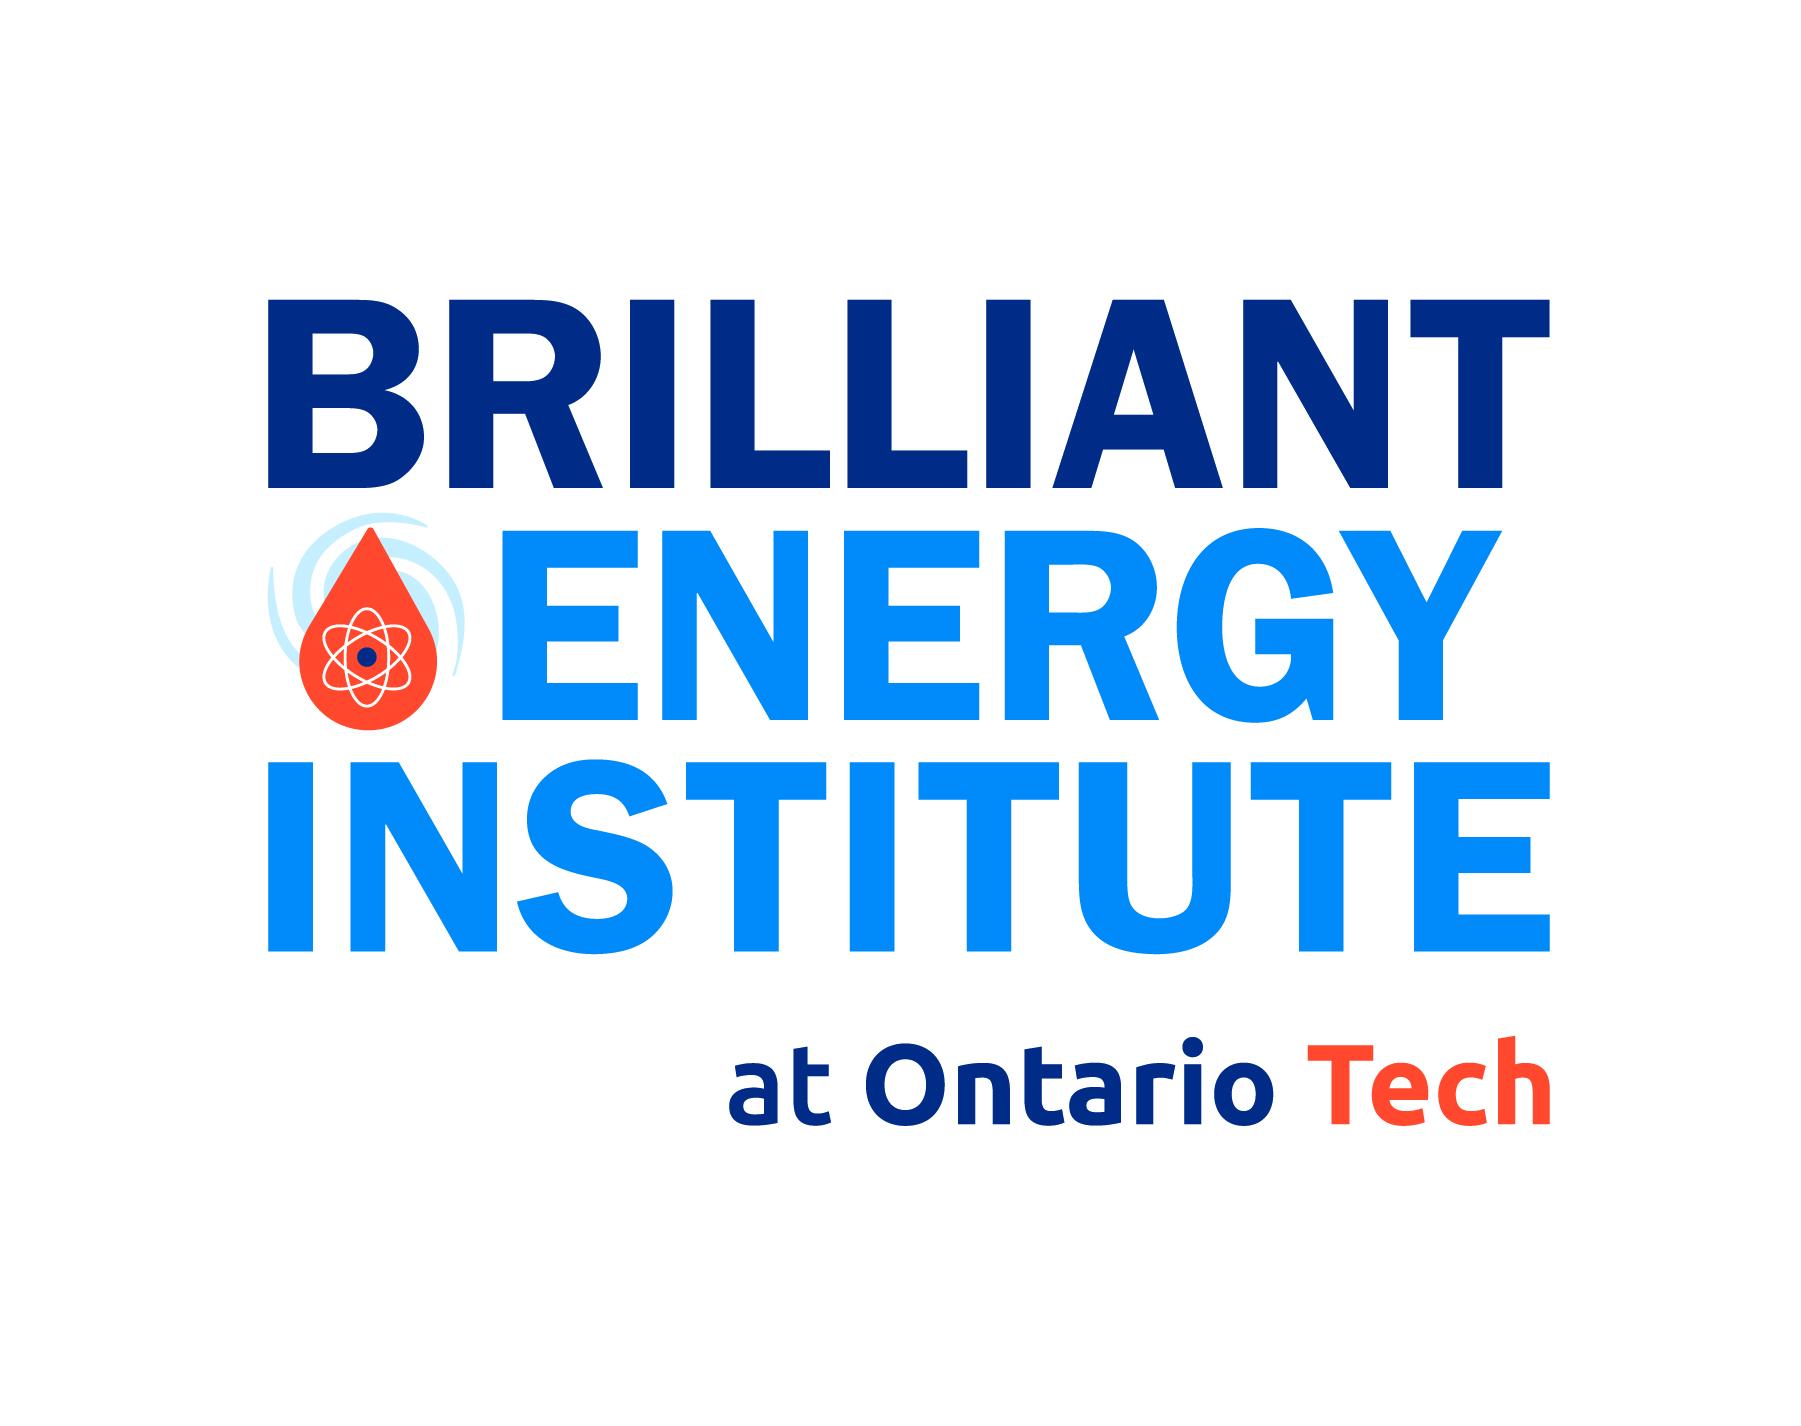 A logo that says "Brilliant Energy Institute at Ontario Tech"